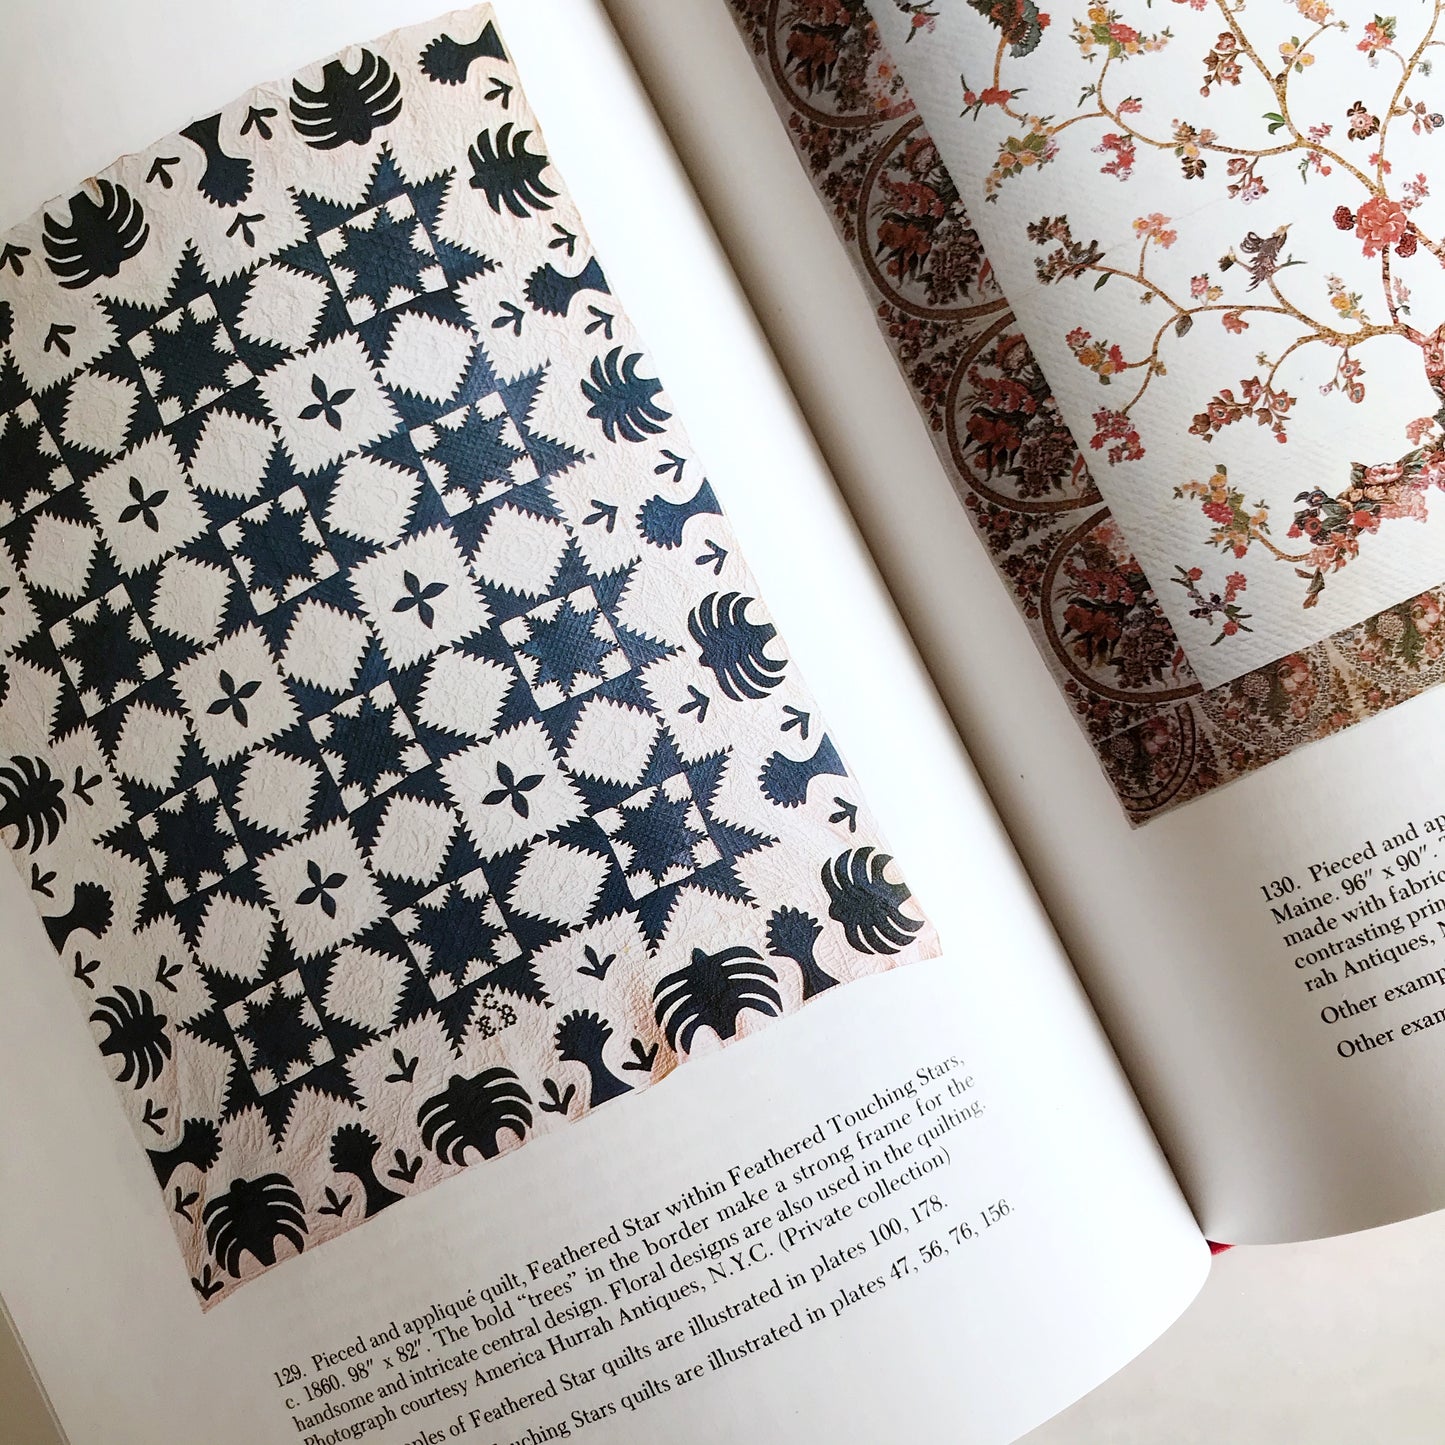 Book: Treasury of American Quilts